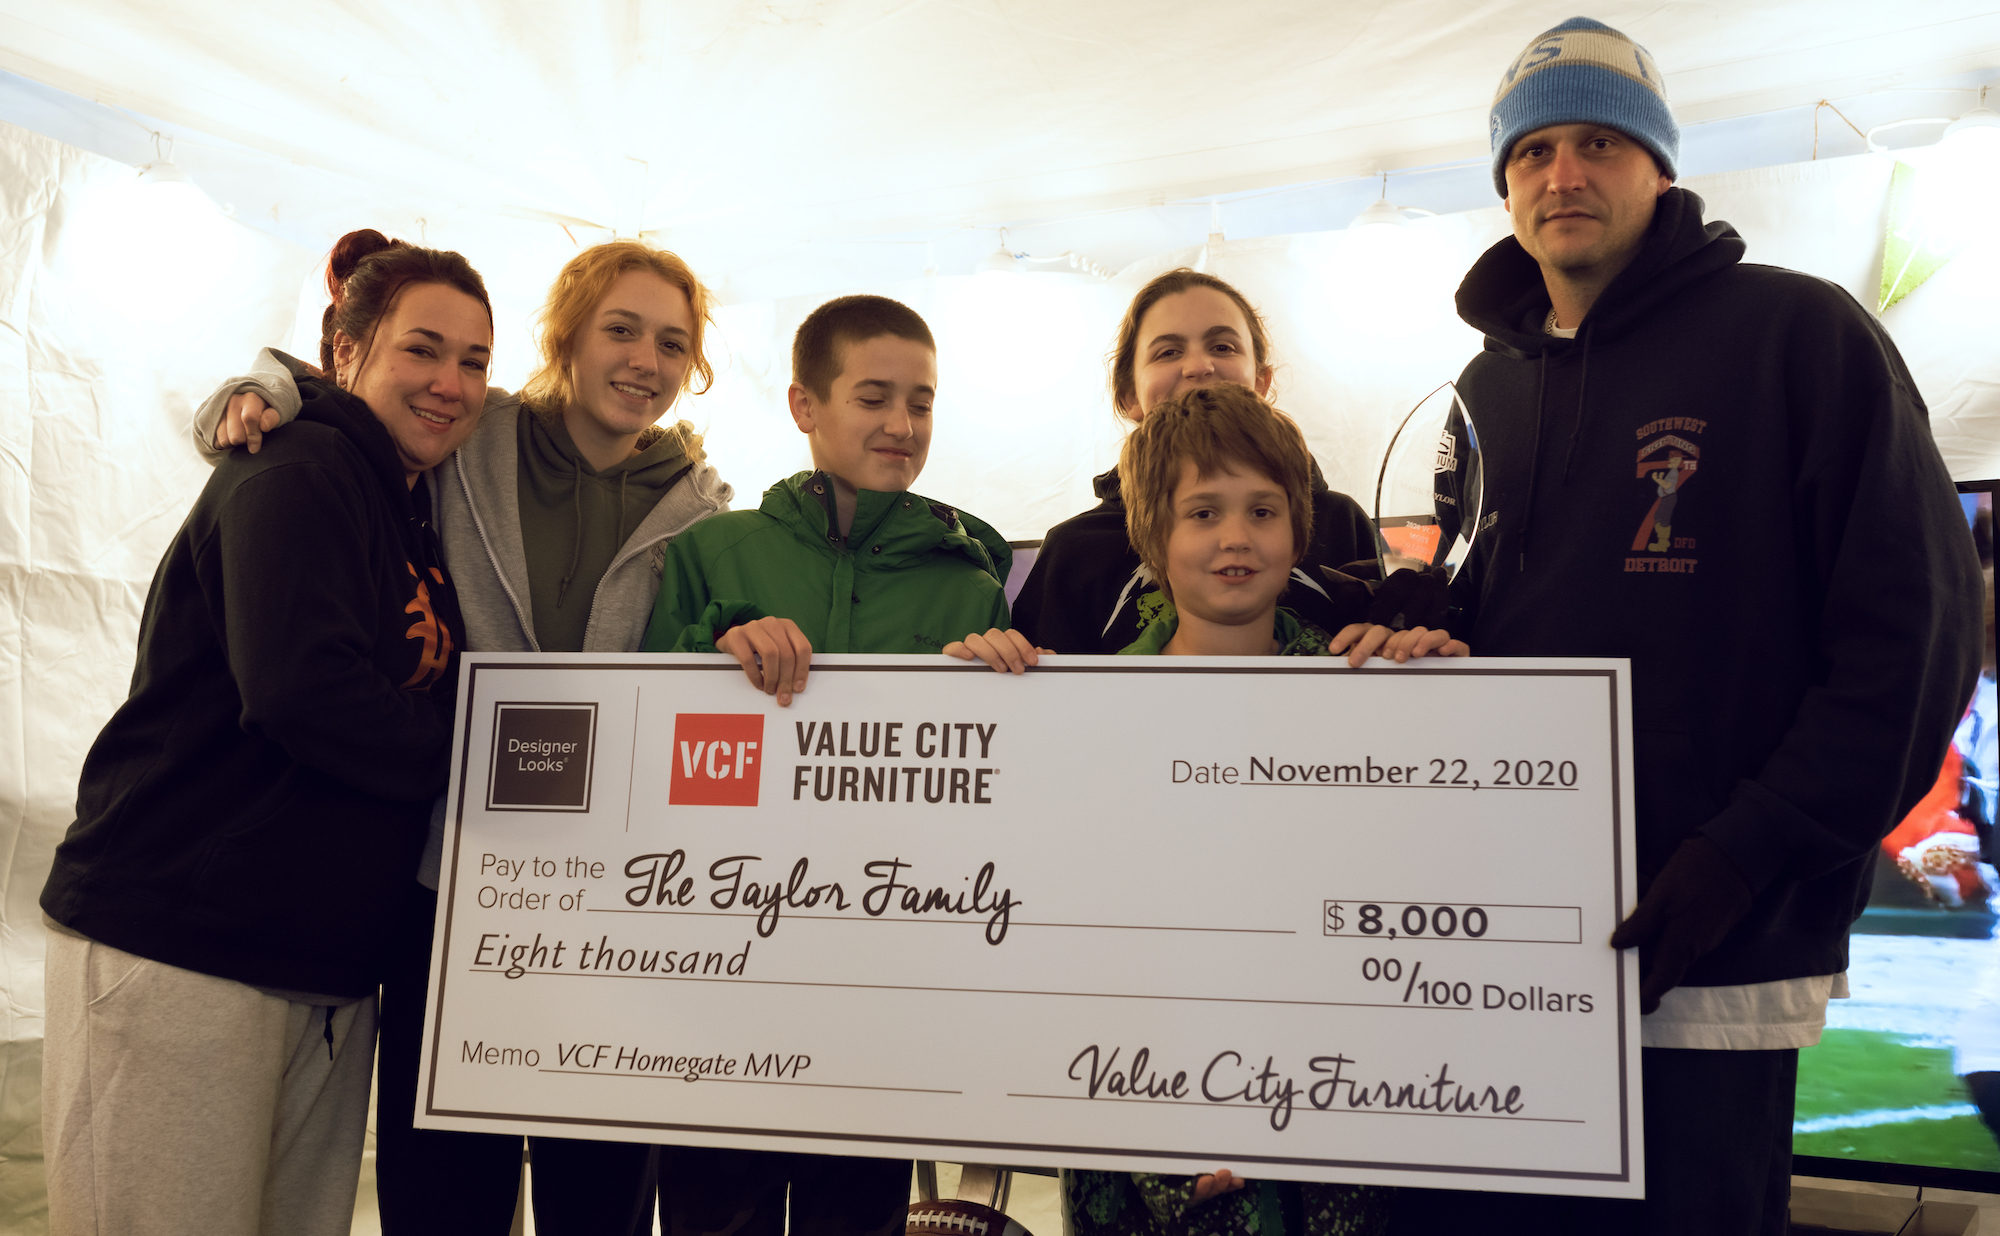 Value City Furniture presented the Taylor family with $8,000 during its Homegate surprise. The donation was meant to help the family who has been through great hardship over the past few years.